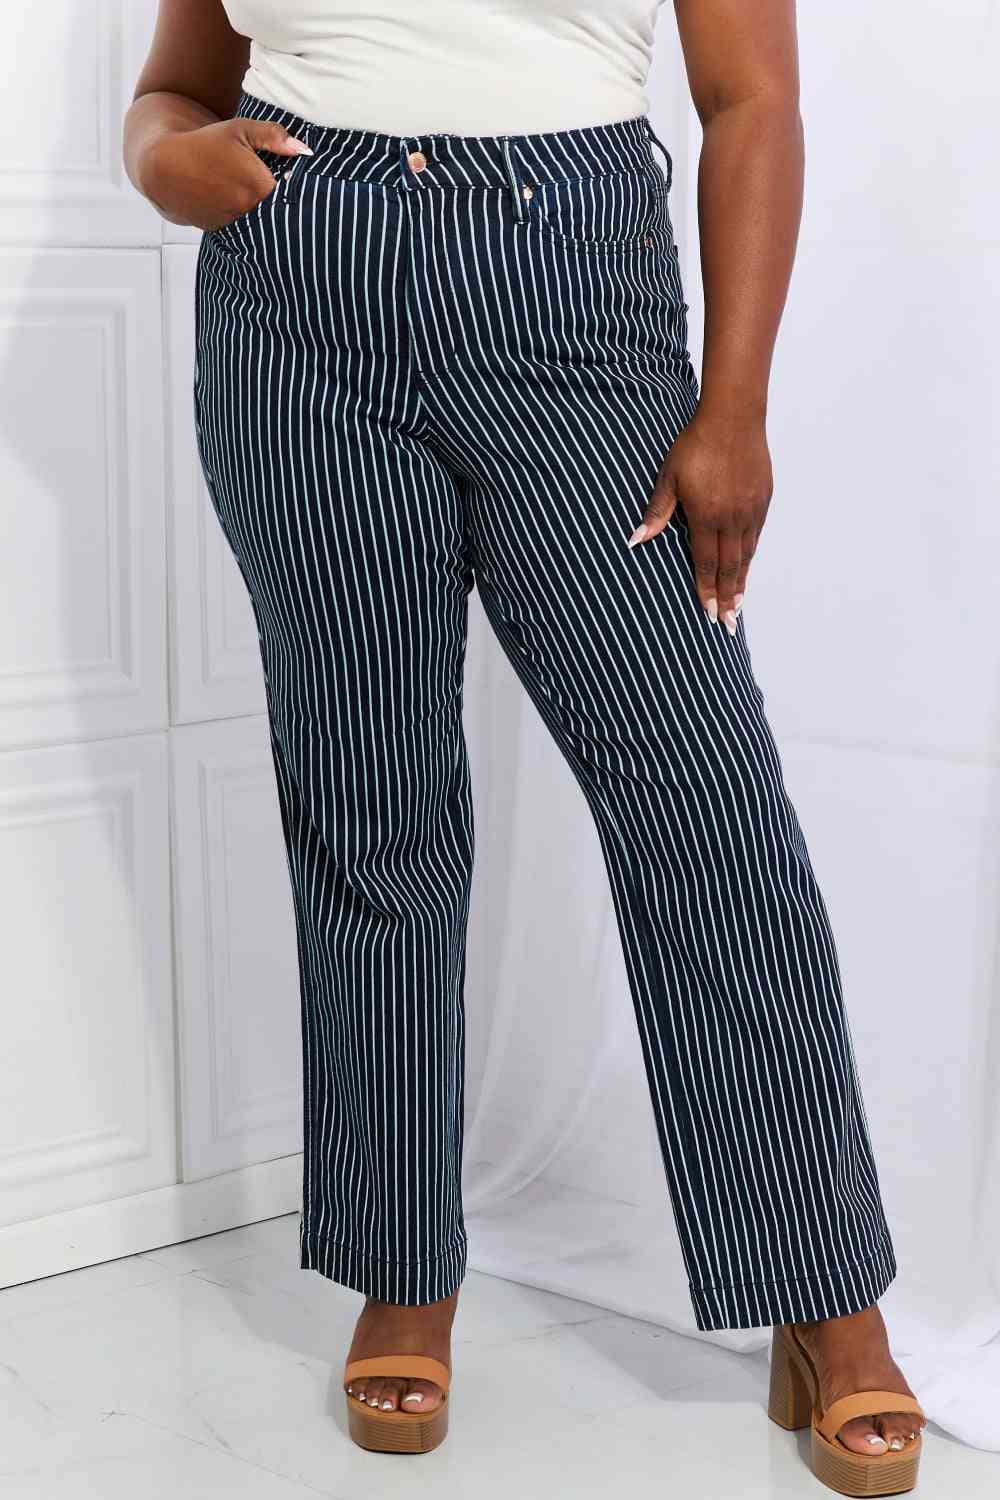 Judy Blue Cassidy Full Size High Waisted Tummy Control Striped Straight Jeans - Just Enuff Sexy